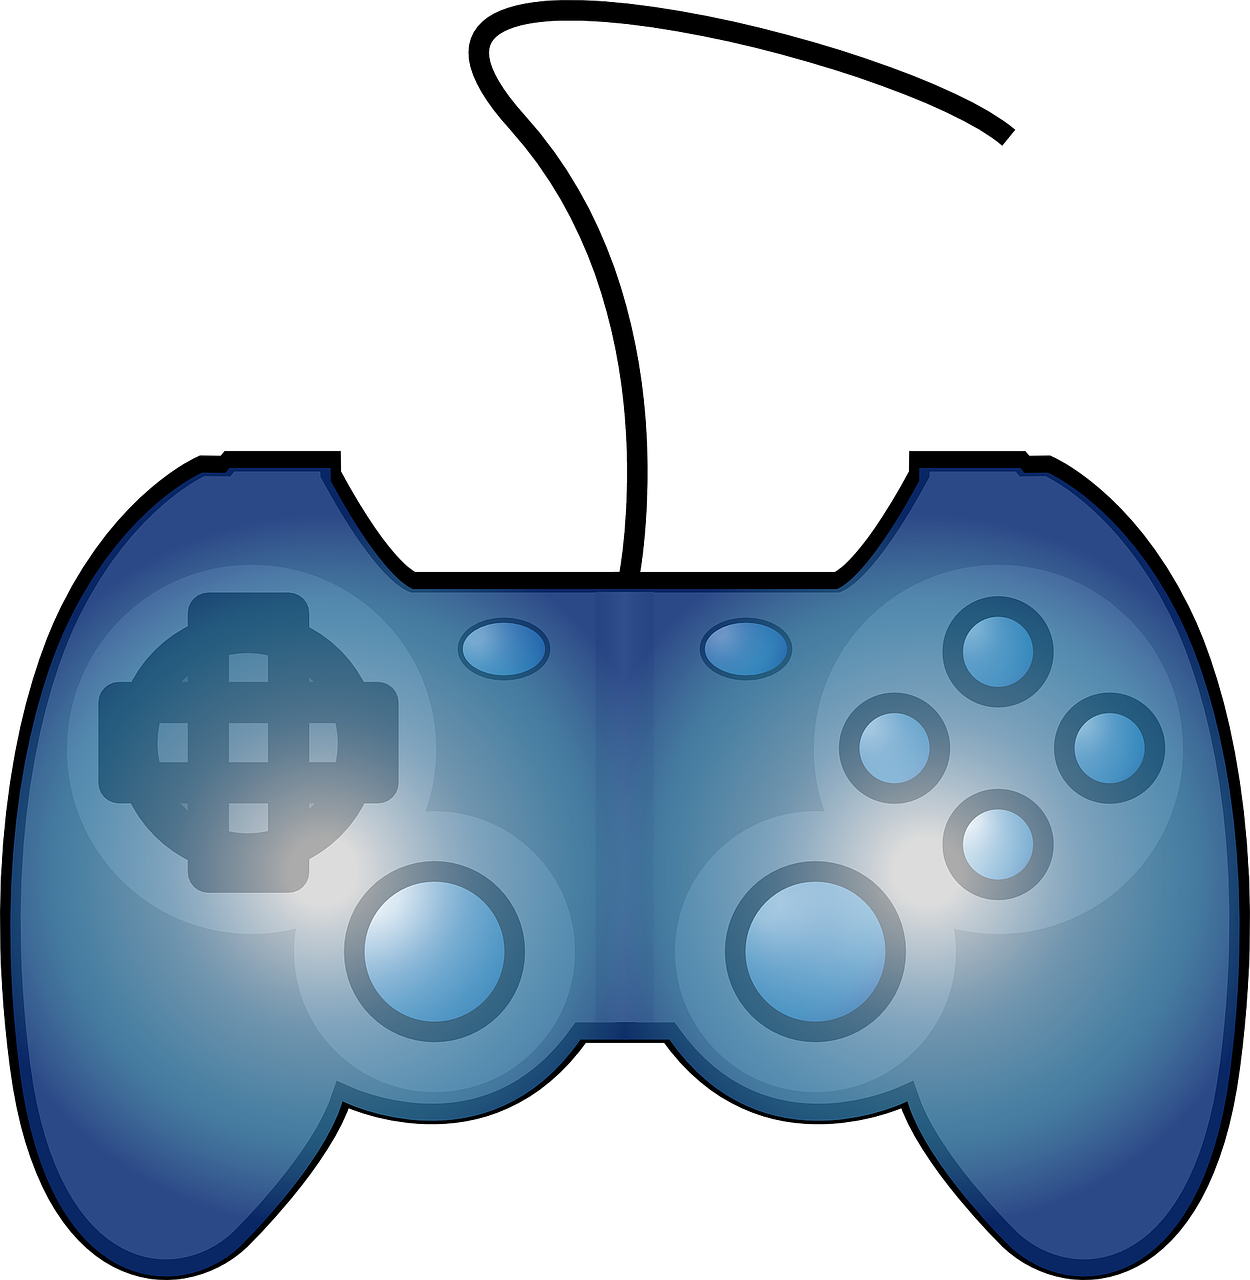 gaming,controller,electronic,toy,arcade,videogame,playstation,game pad,competition,device,fun,leisure,connection,control,activity,console,addictive,action,buttons,computer games,interaction,interactive,free vector graphics,free pictures, free photos, free images, royalty free, free illustrations, public domain